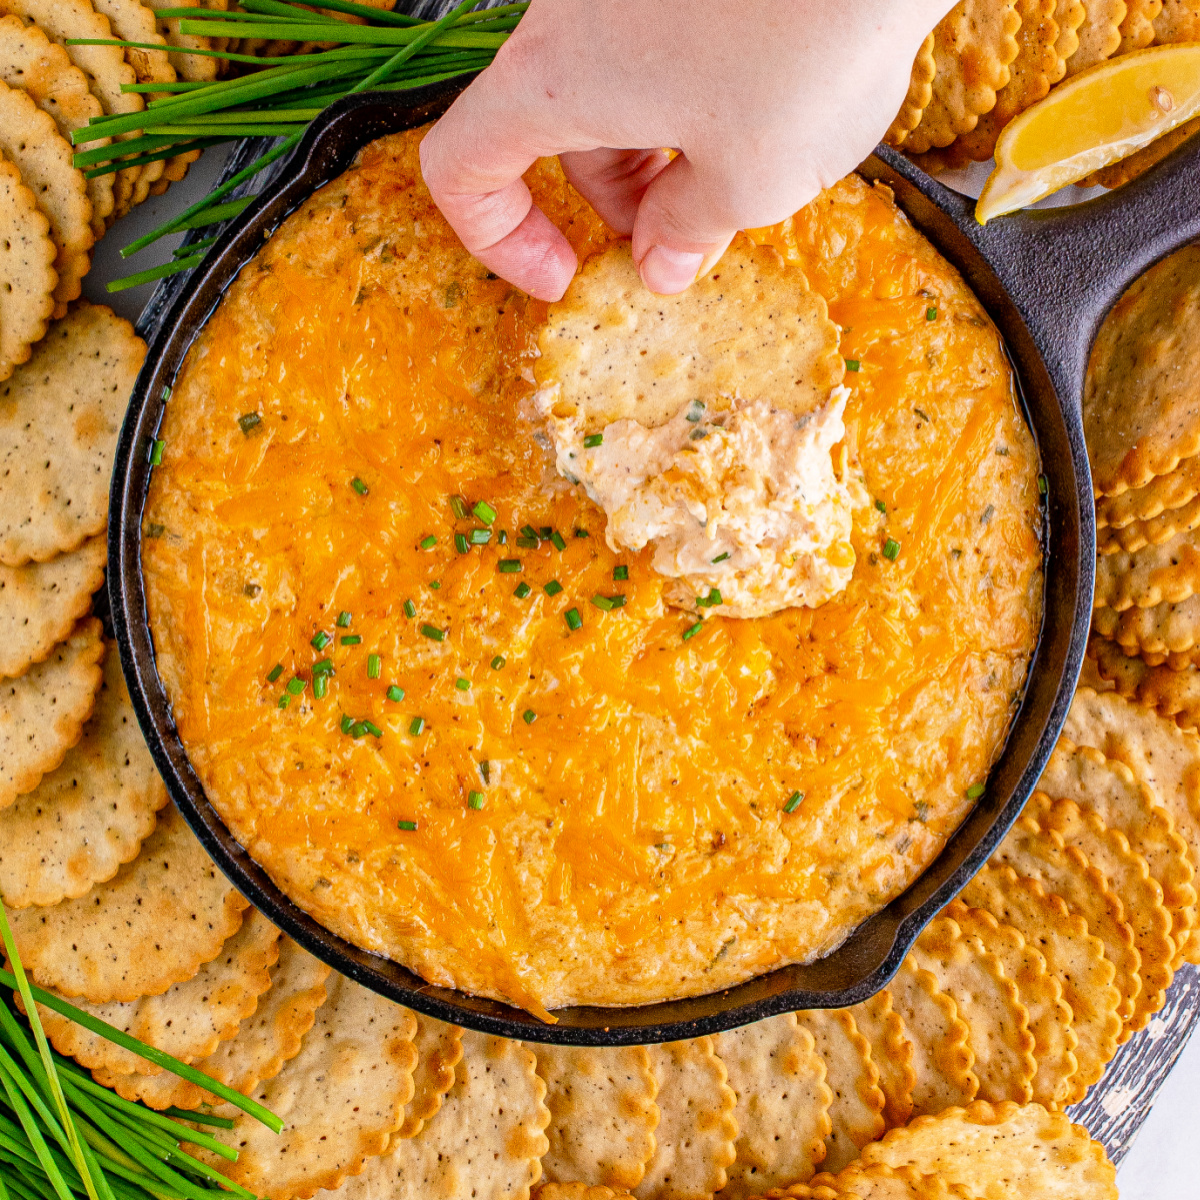 Smoked crab dip with a cracker scooping up a big bite of dip.